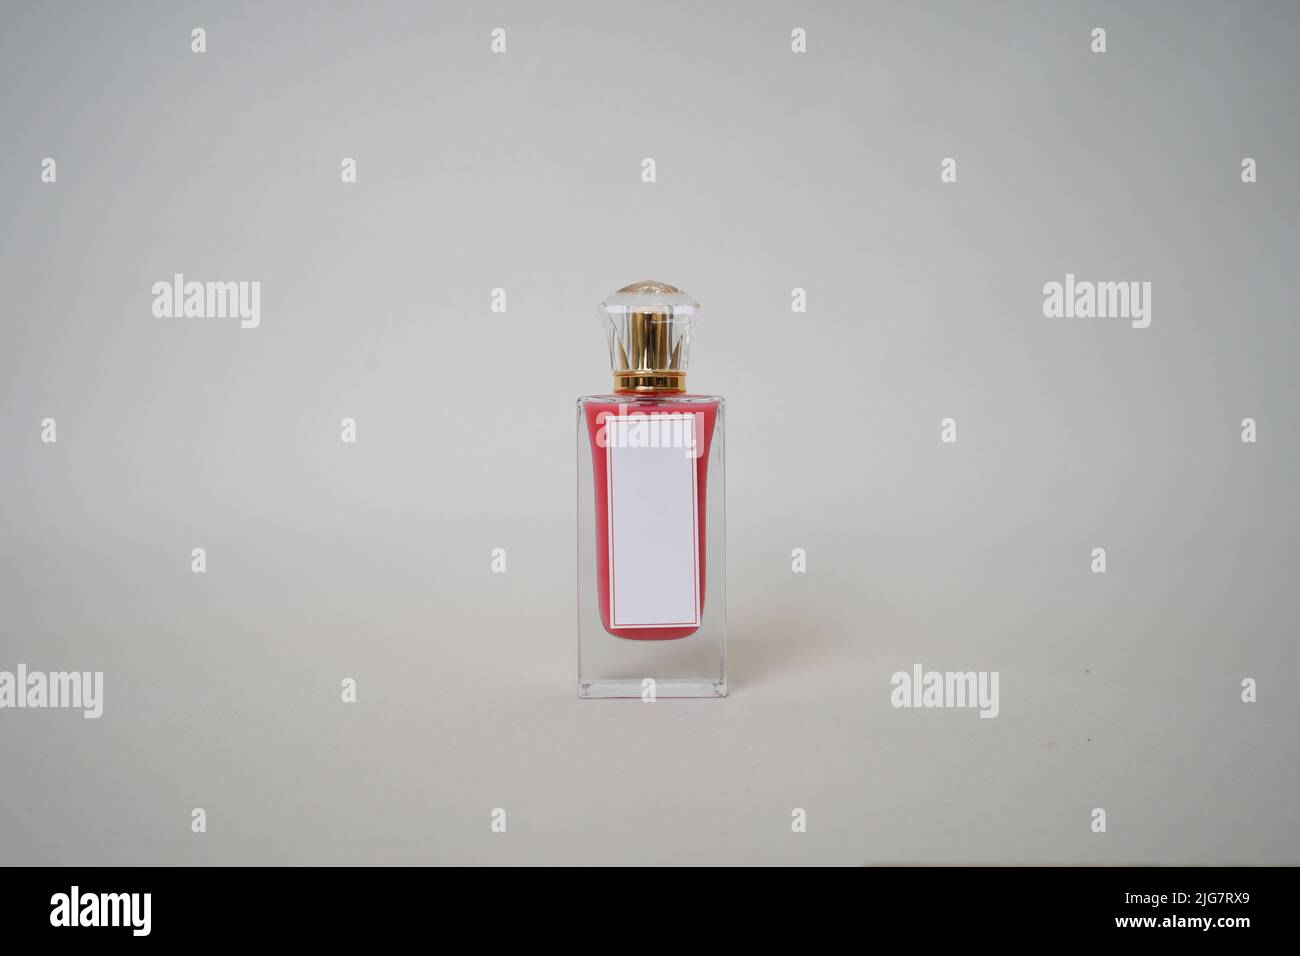 Red Perfume bottle and cap for branding isolated on white background, Red Perfume bottle mockup. Stock Photo